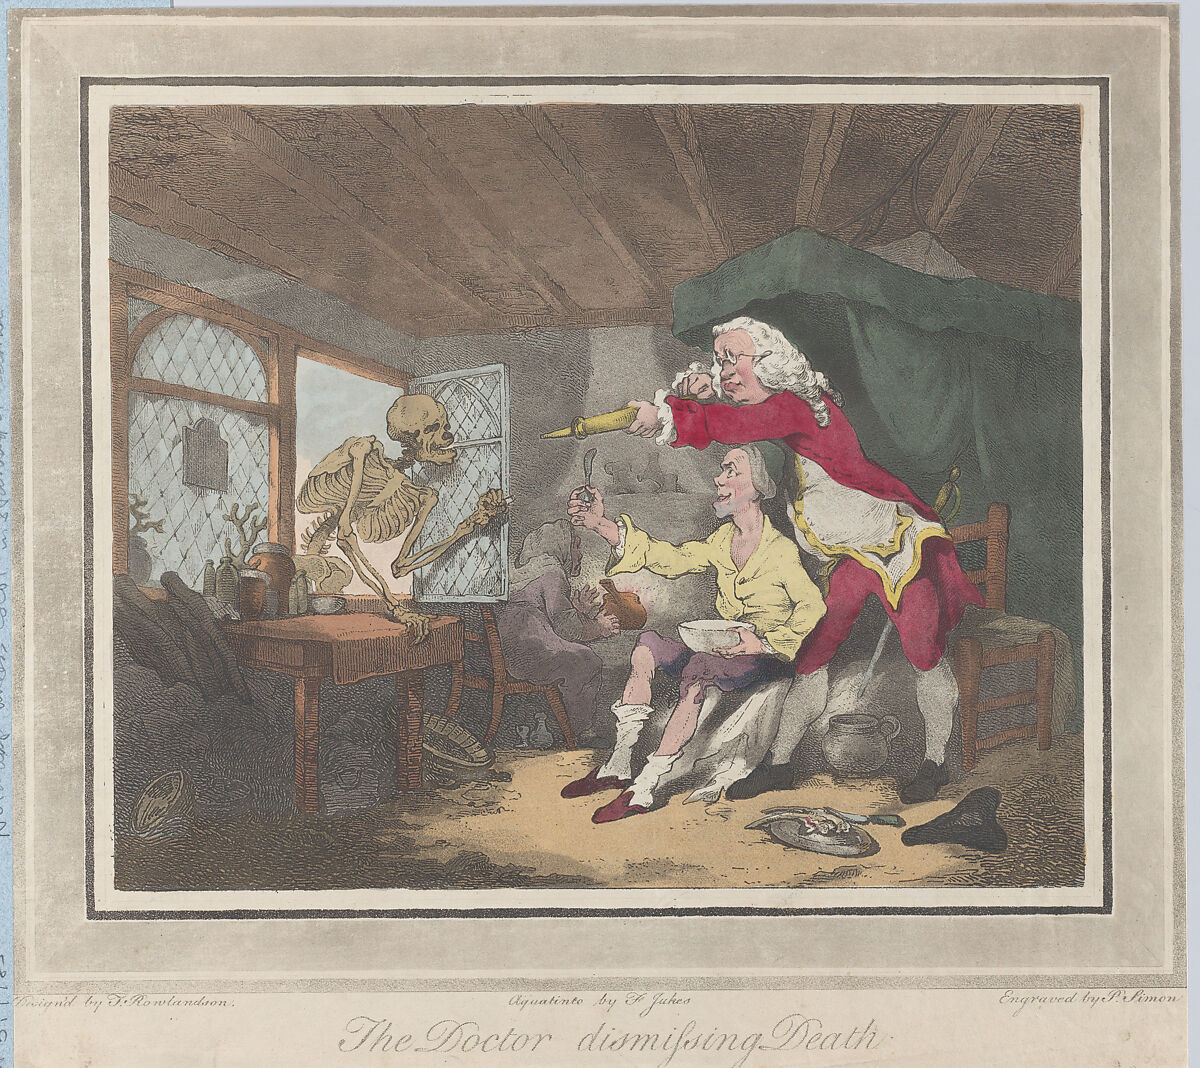 The Doctor Dismissing Death, Etched by Peter Simon (British, London ca. 1764–1813 Paris), Hand-colored etching and aquatint 